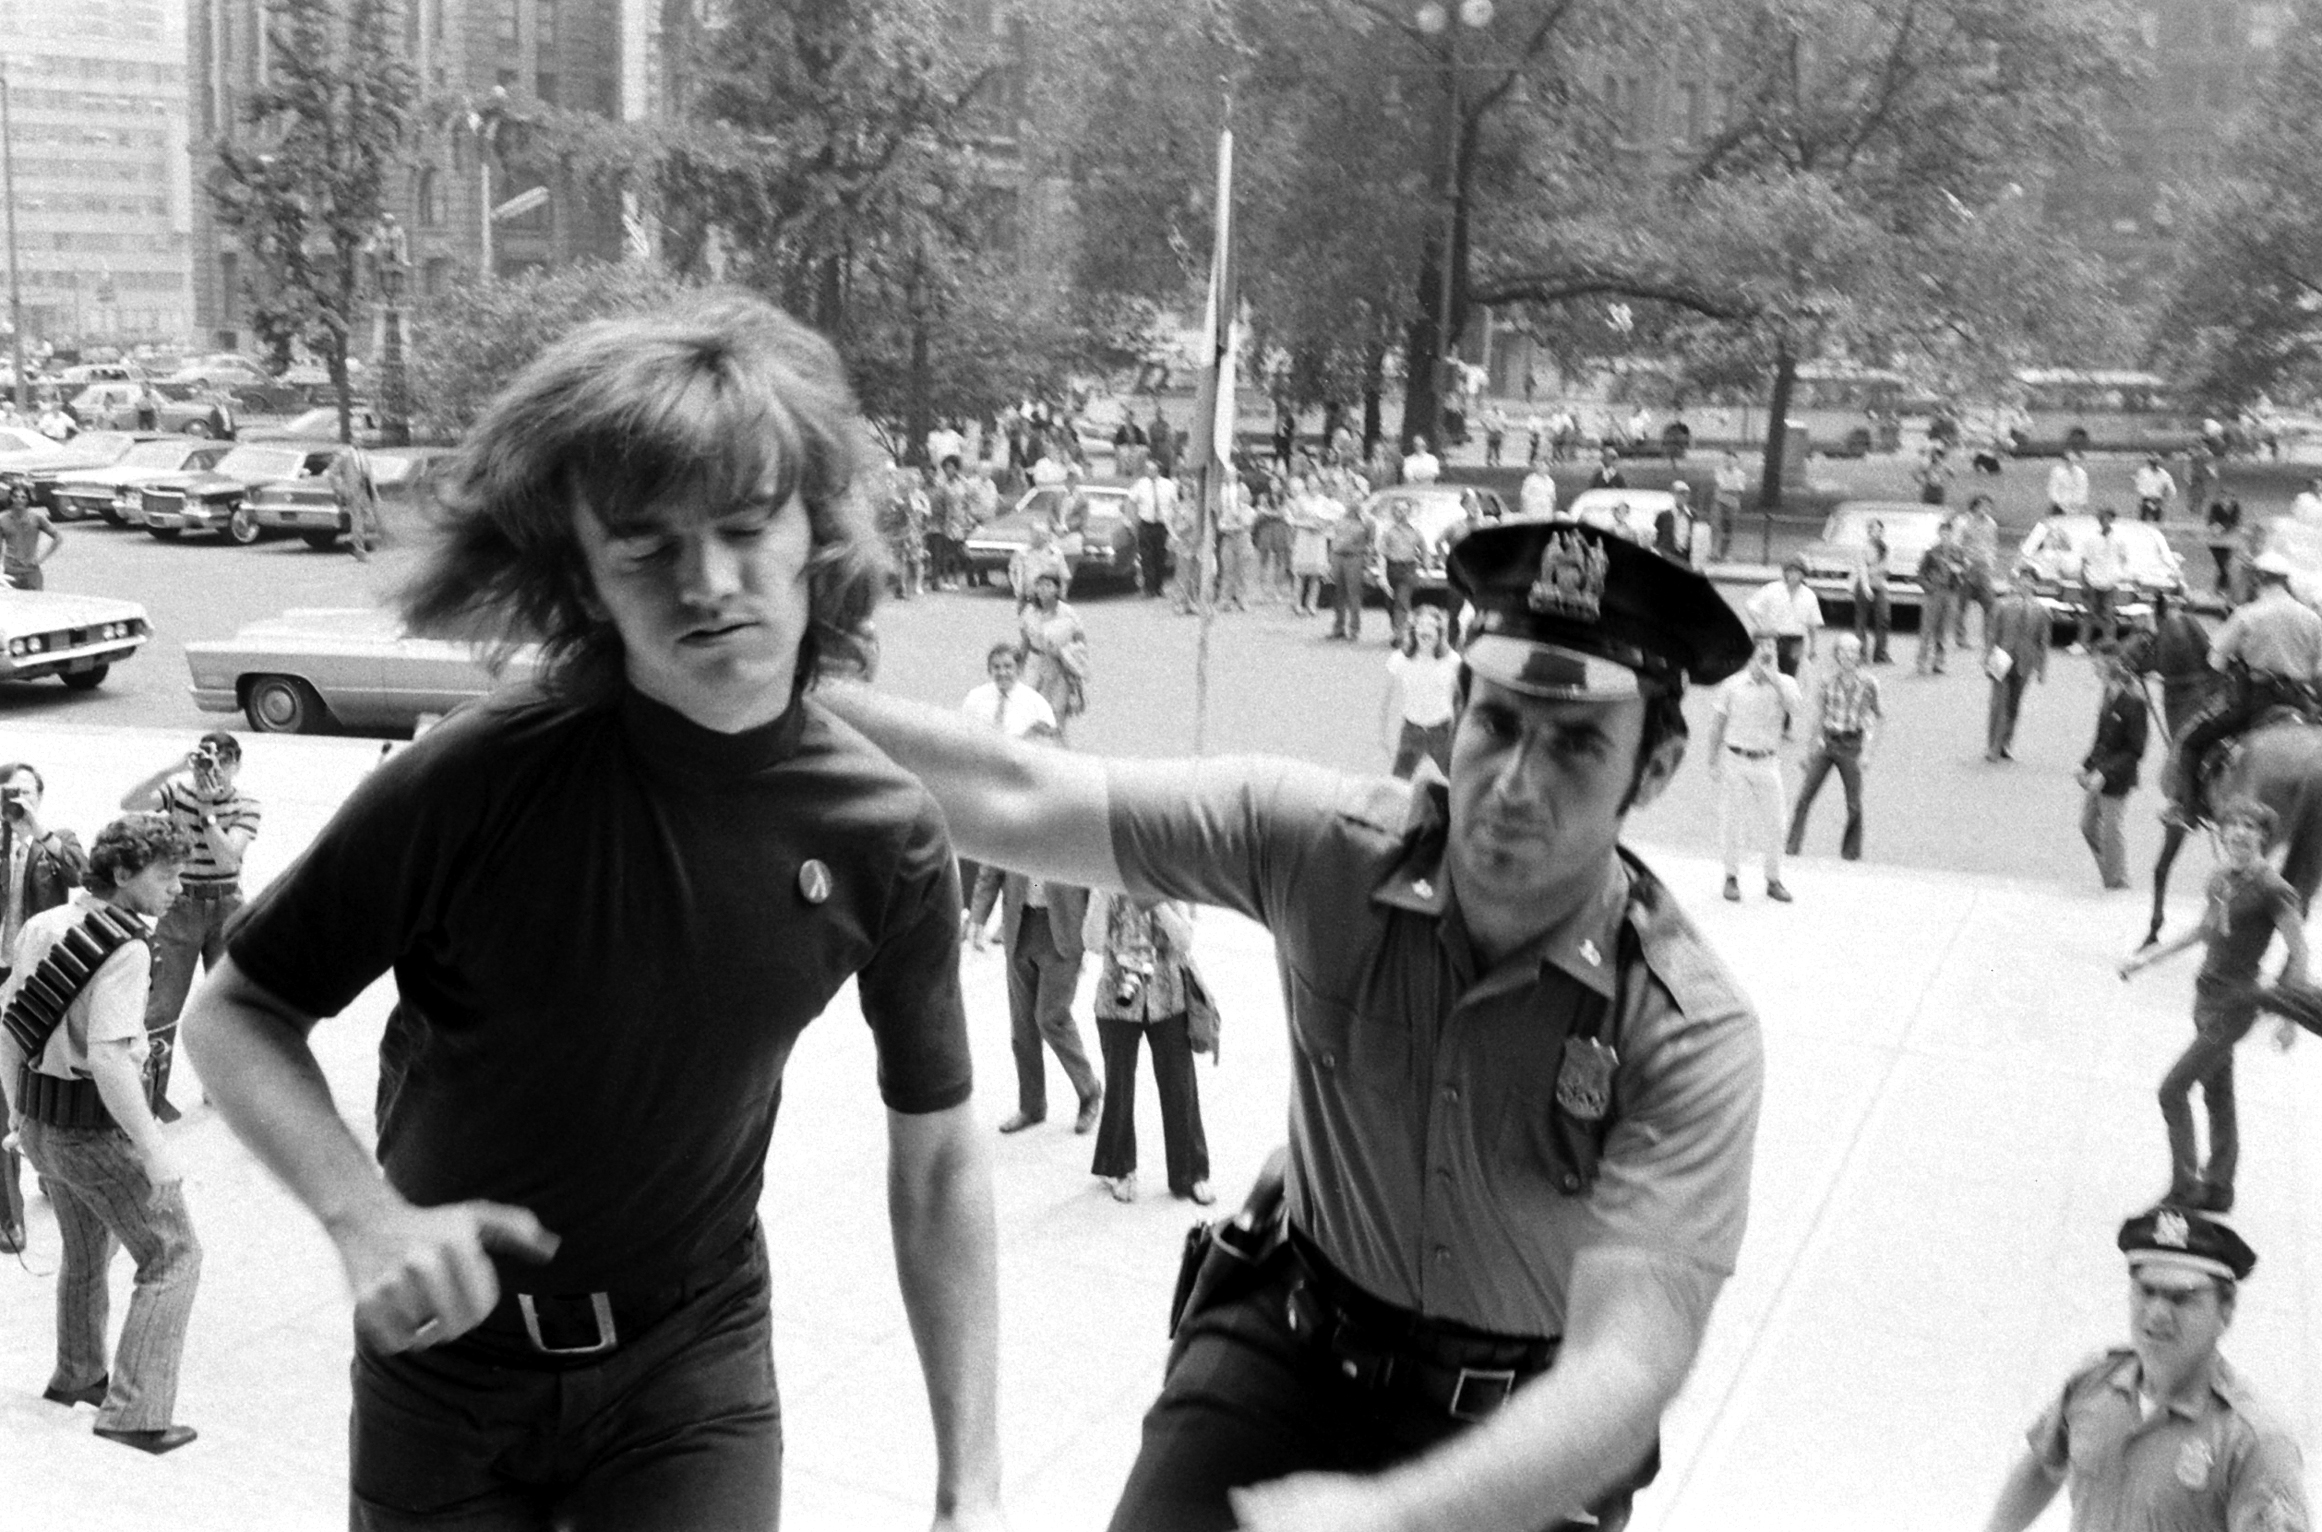 Collared by a patrolman after he deliberately crossed police barricades at New York's City Hall, Gay Activists Alliance President Jim Owles submits to arrest. Members of his organization were protesting City Council reluctance to debate a fair employment bill for homosexuals.